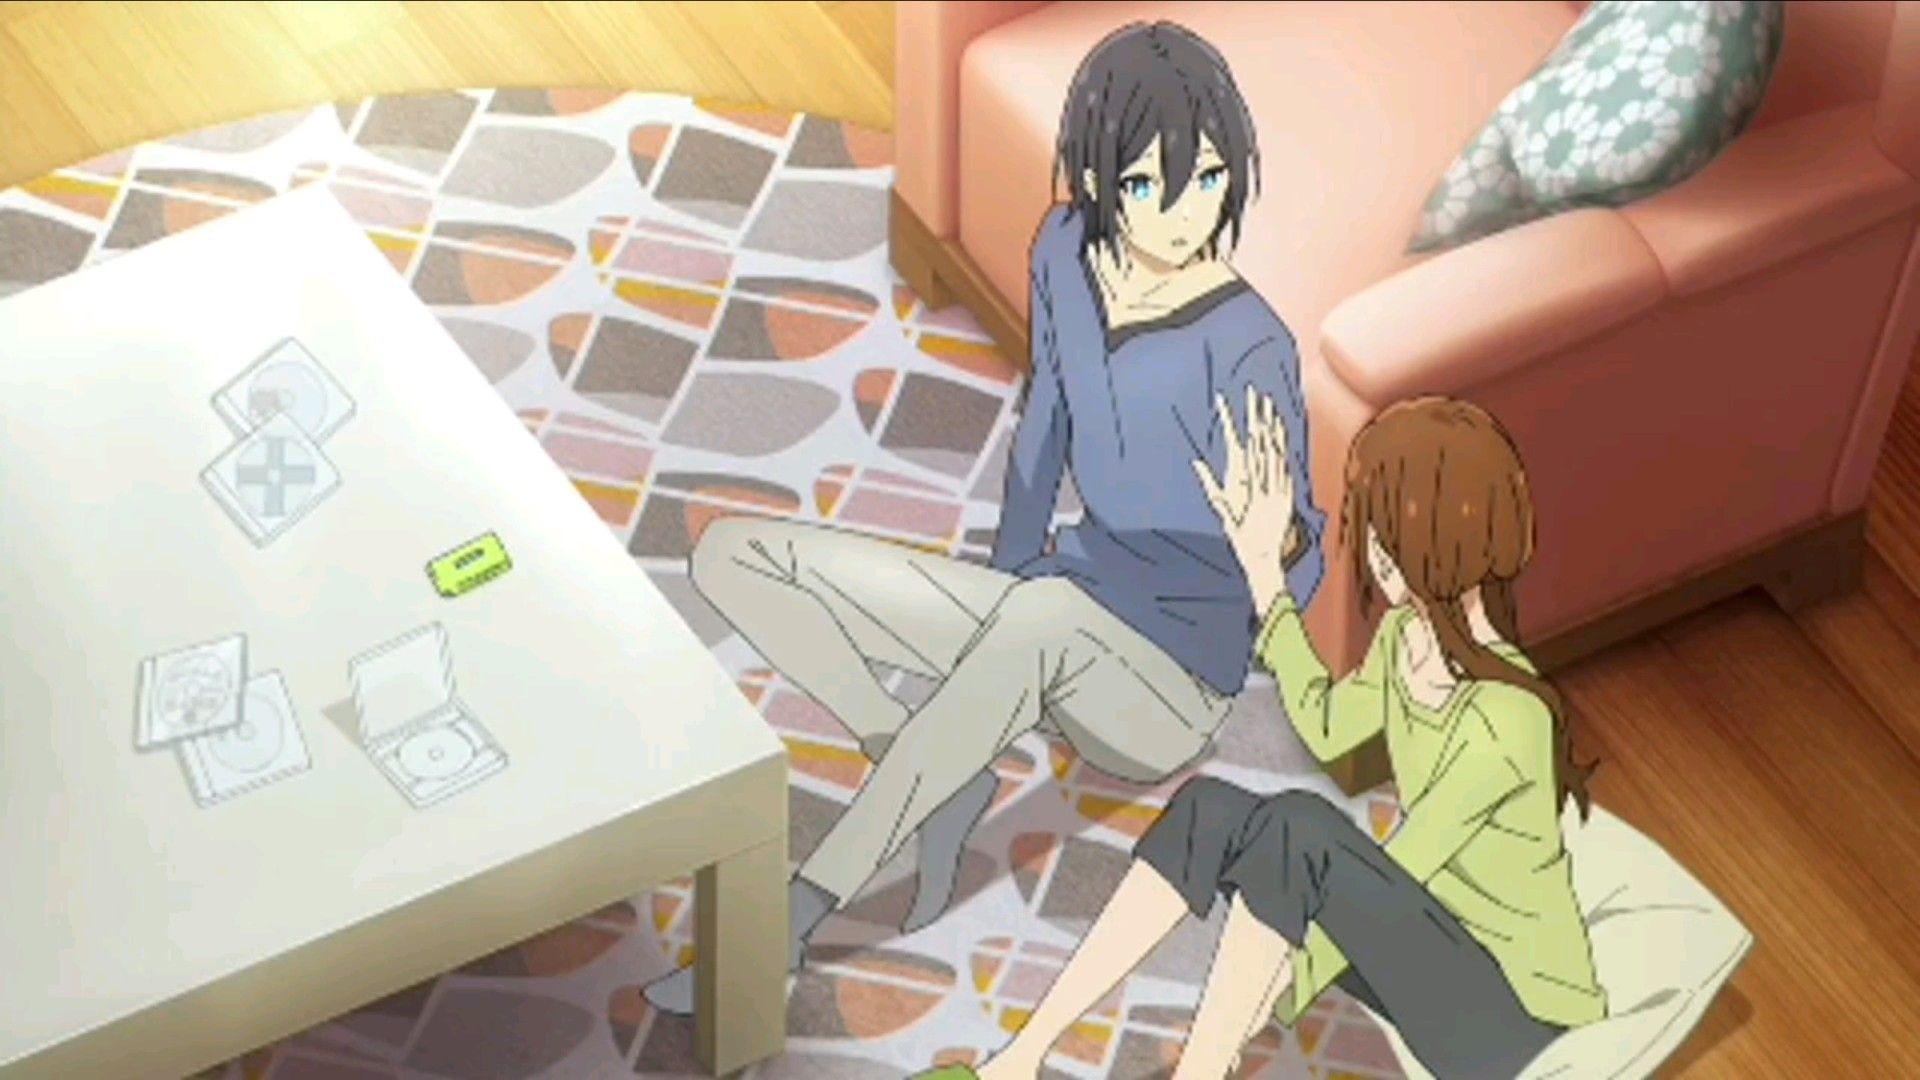 Horimiya The Missing Pieces Episode 1 Hindi Dubbed _ Download Or Watch  Online - BiliBili